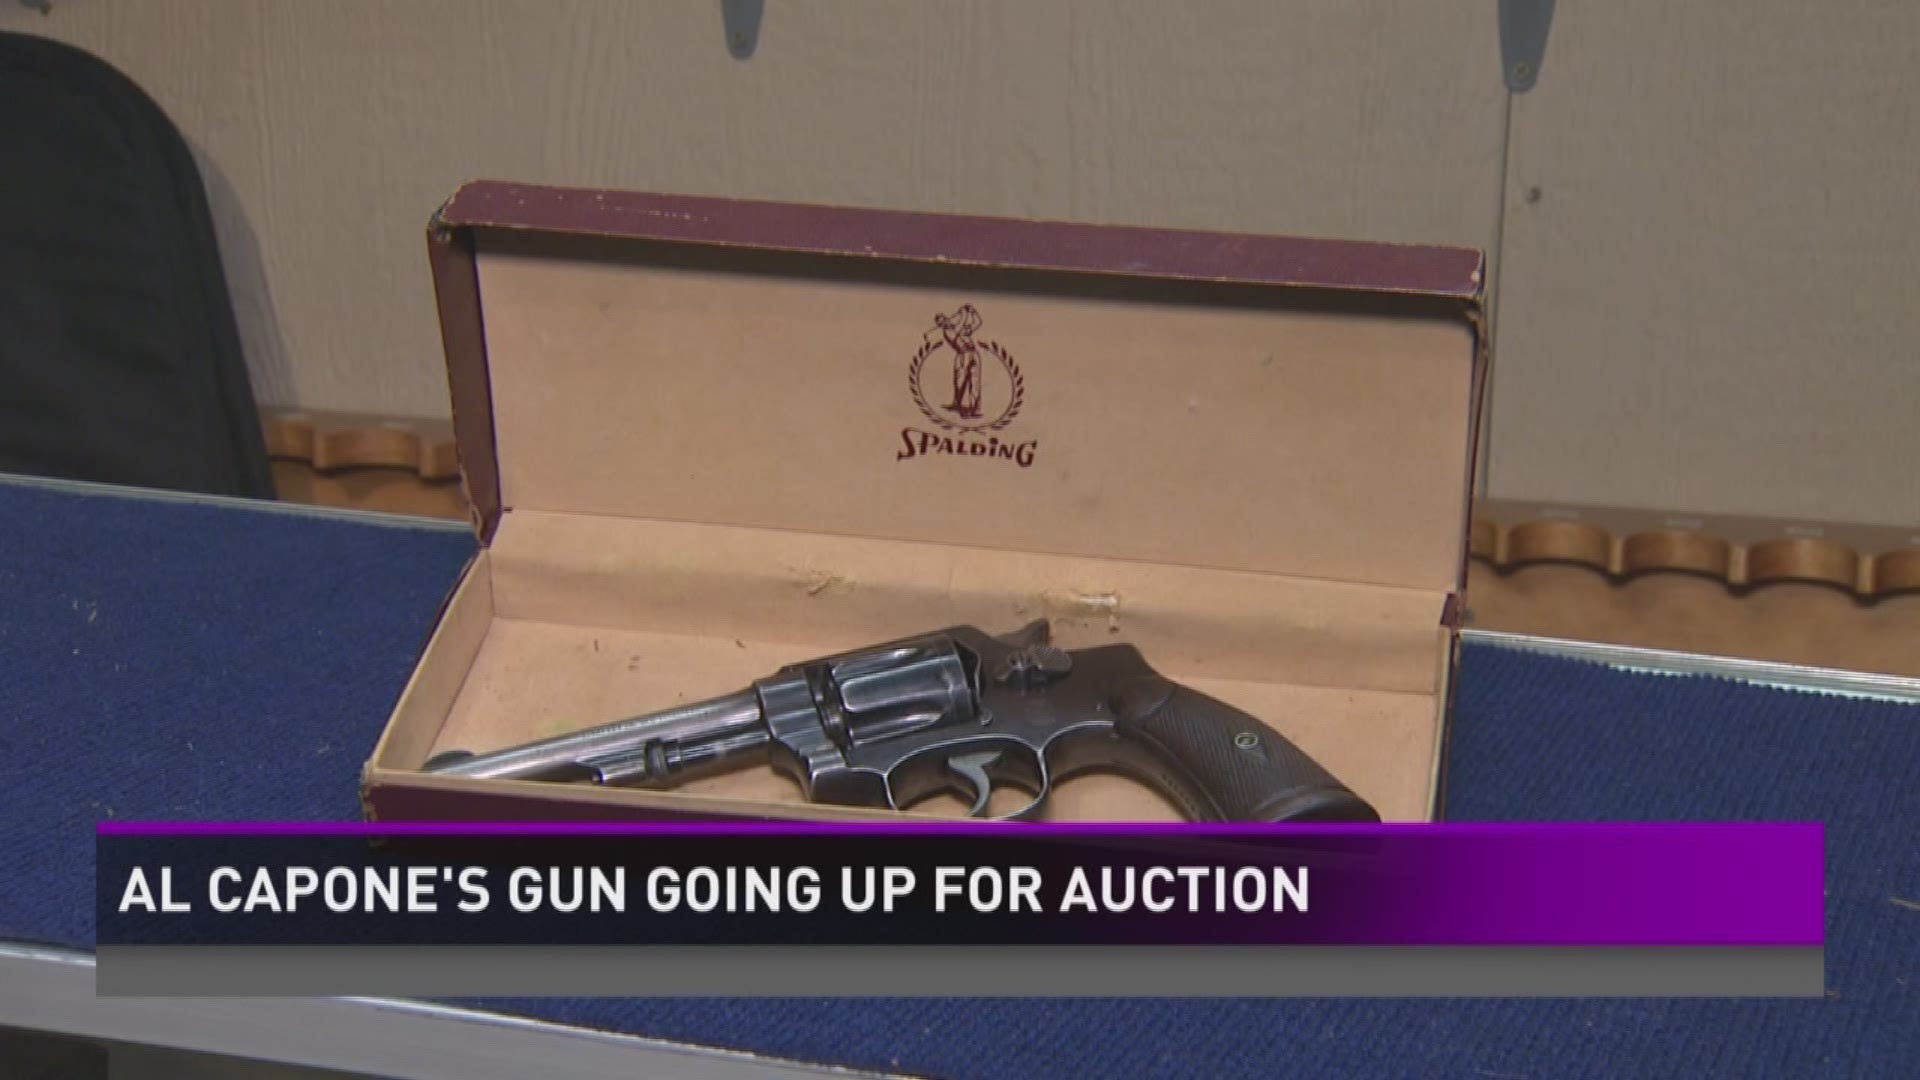 Al Capone's gun going up for auction